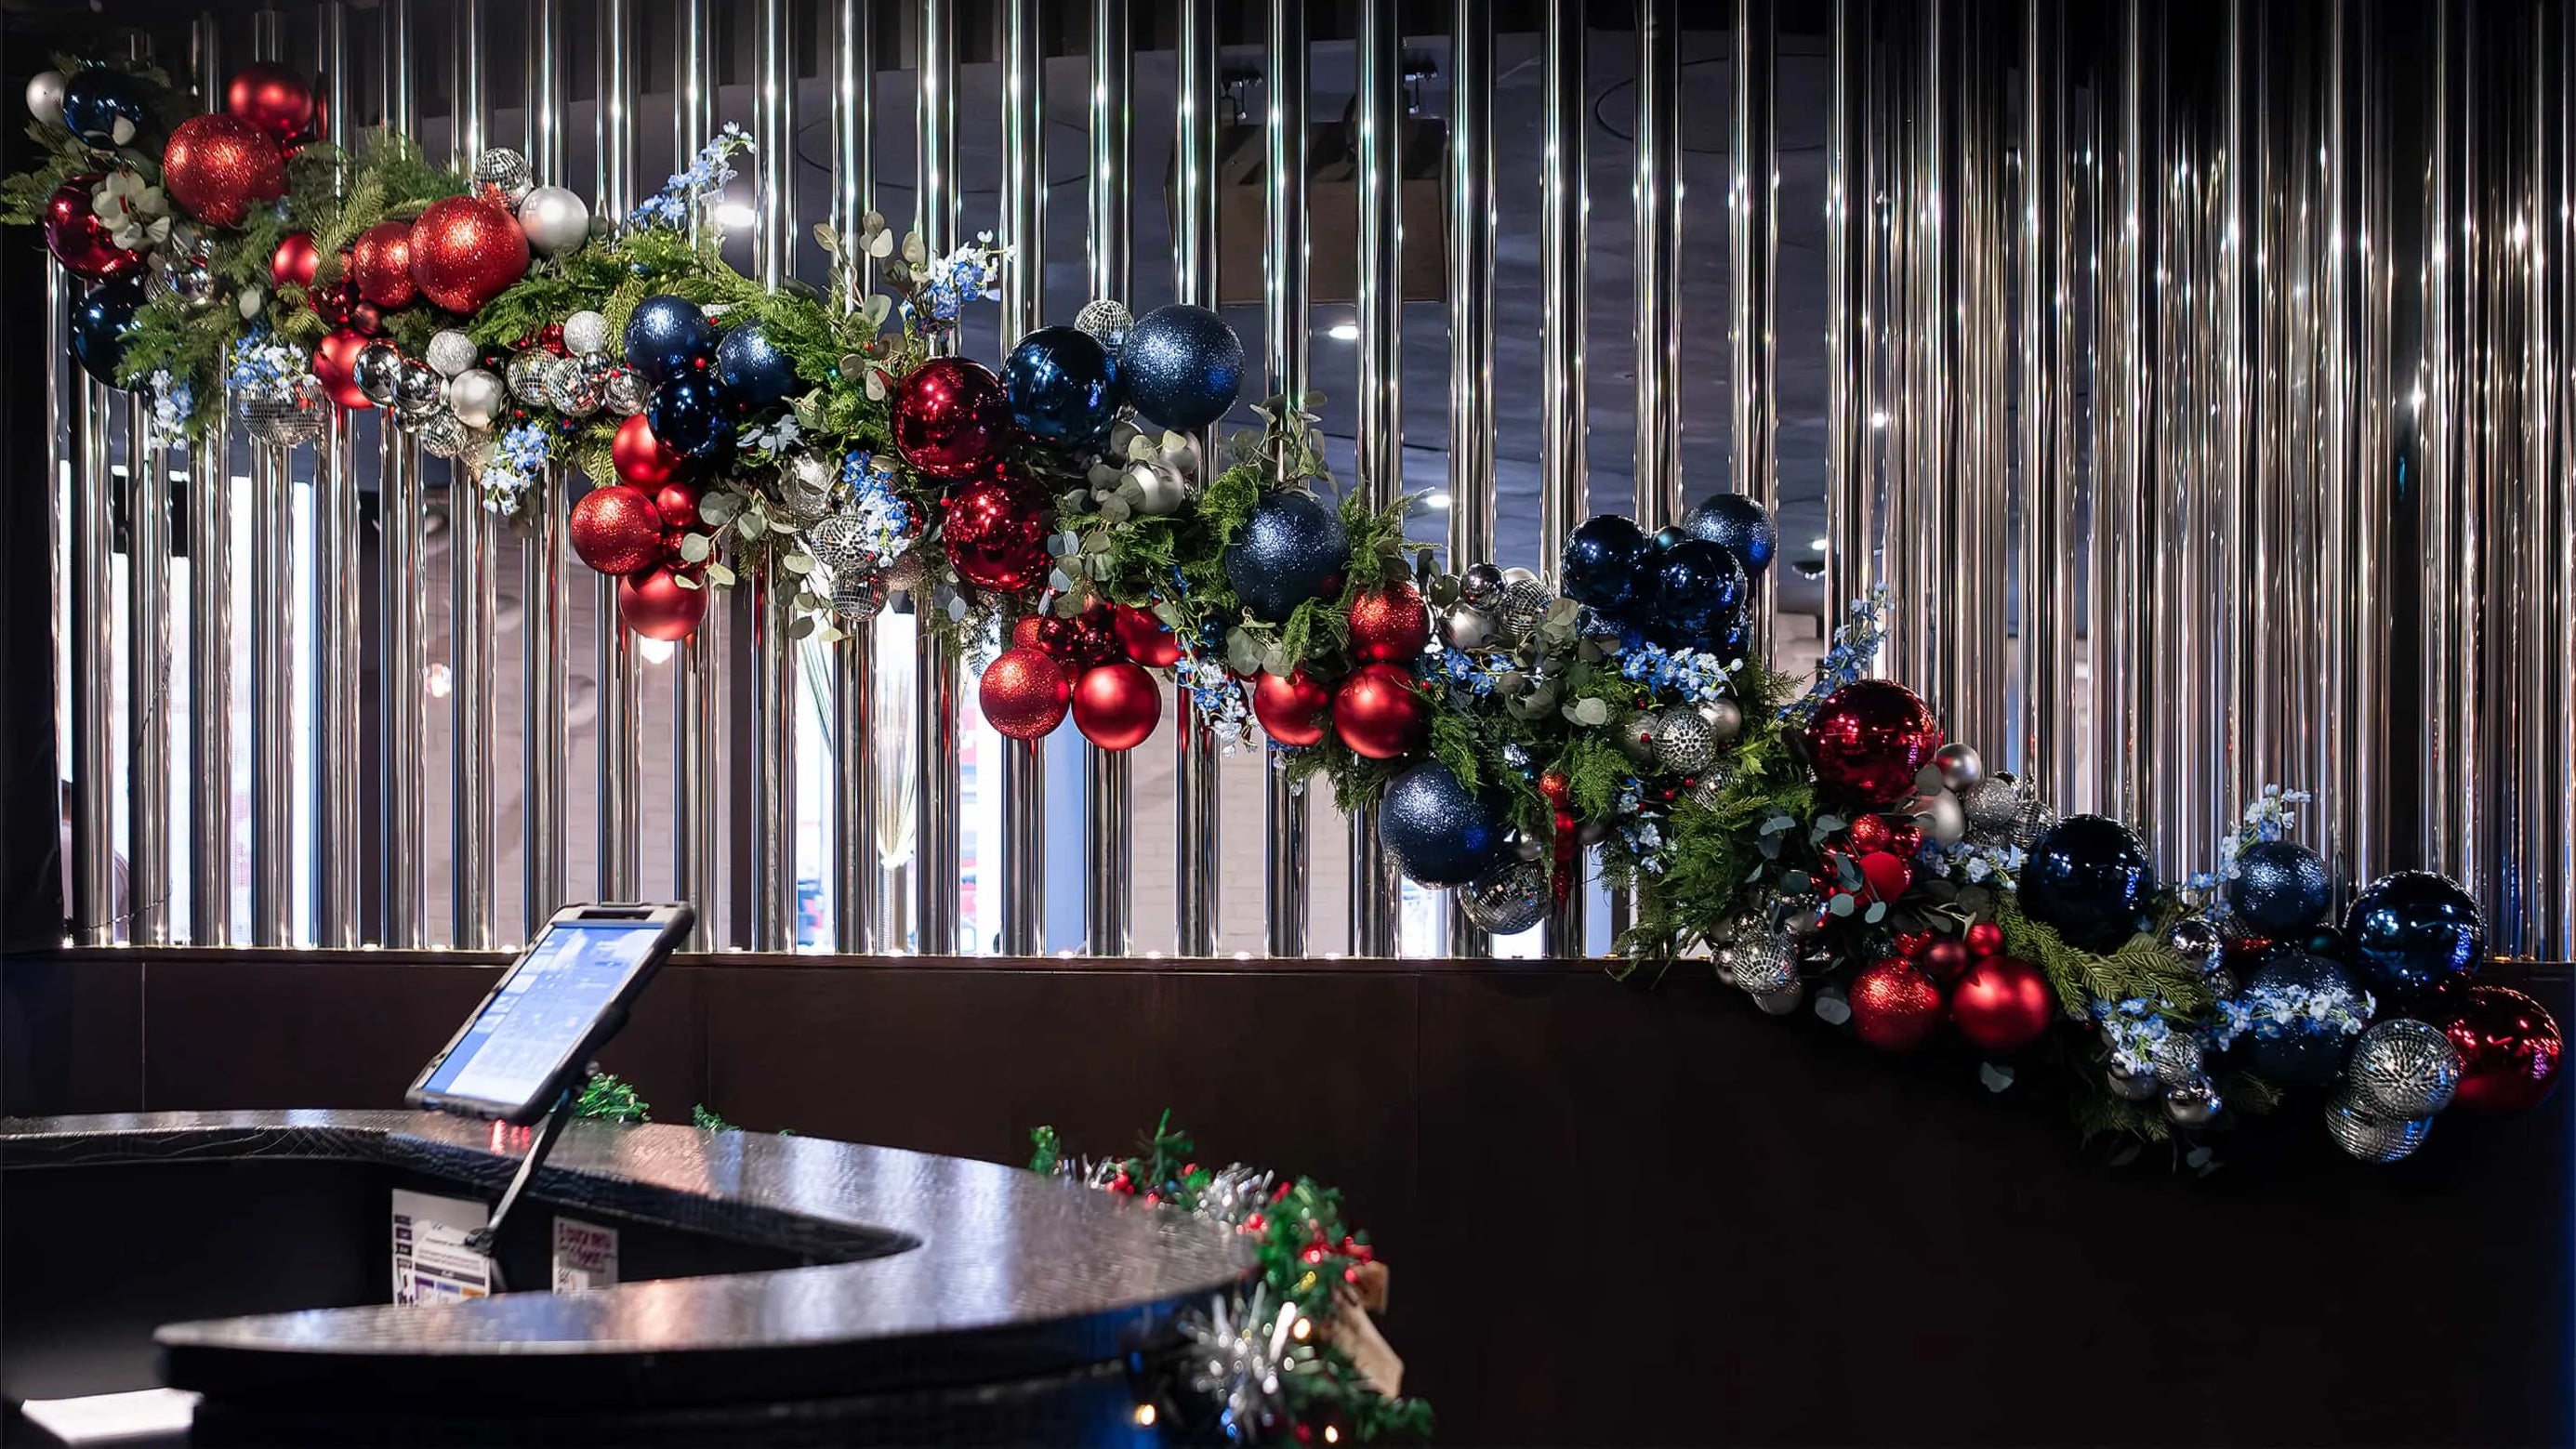 Luxuriously decorated garland with red and blue Christmas baubles and silver accents draping over the reception counter at STK Steakhouse, complemented by a backdrop of reflective vertical metal strips.